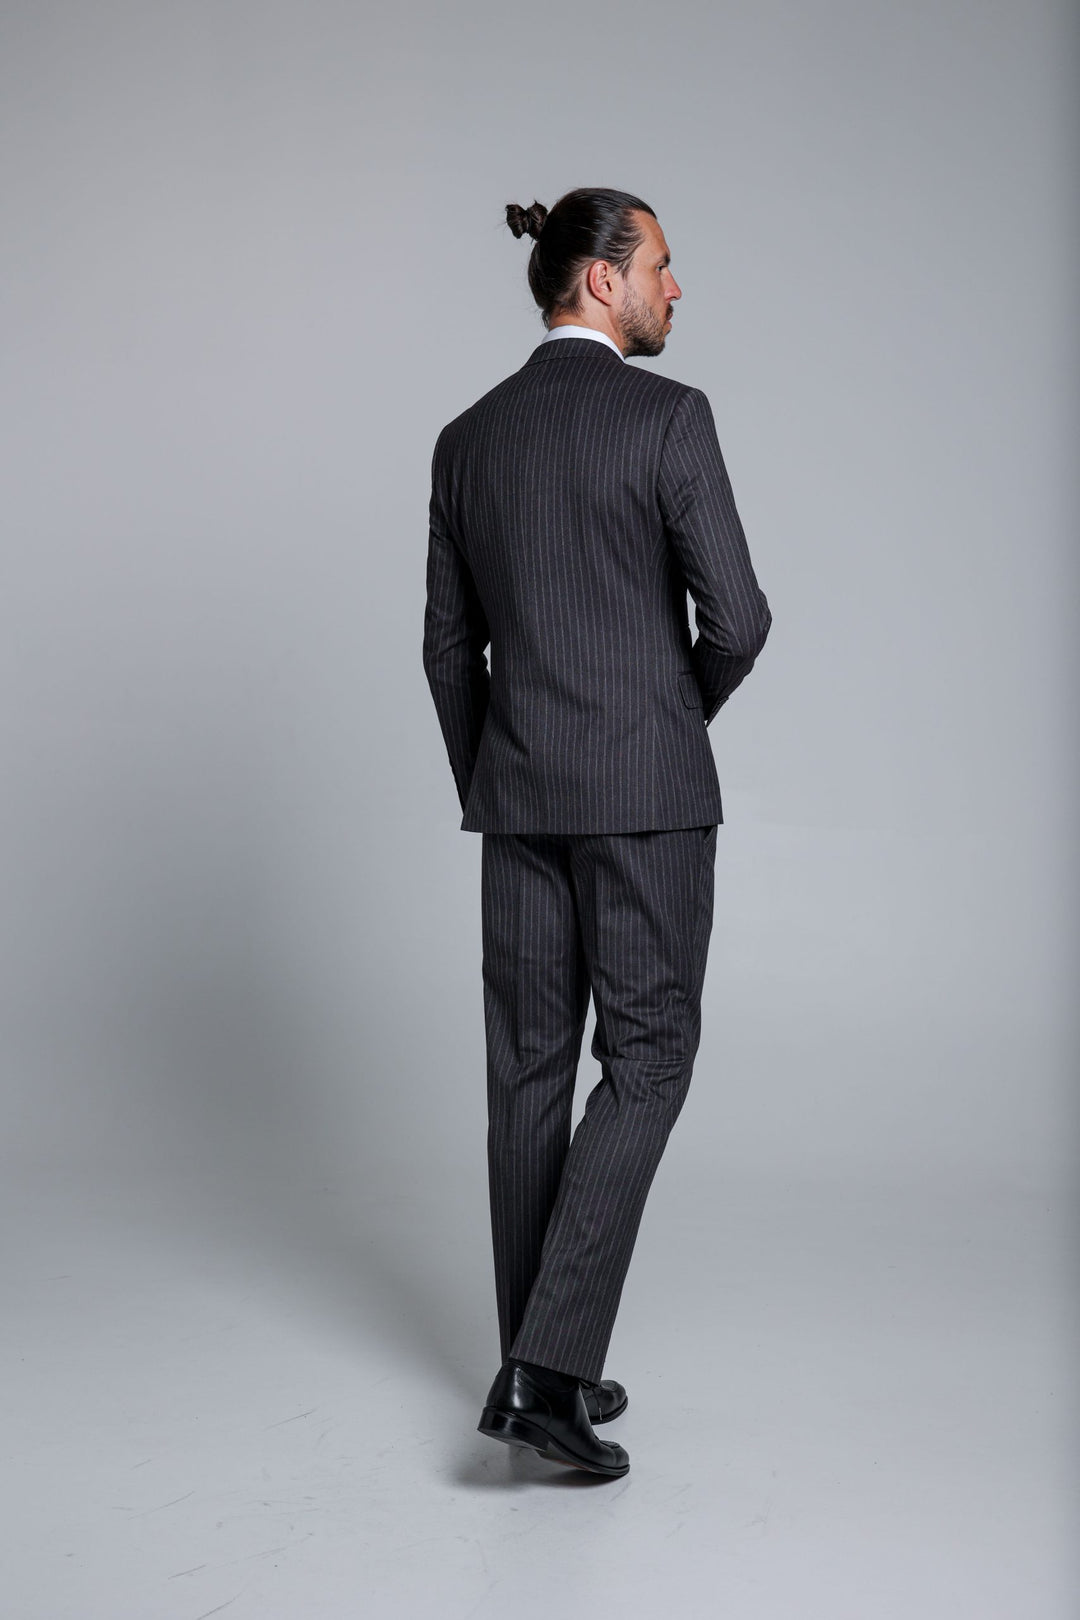 Gray burgundy two-piece suit with stripes and double-breasted jacket